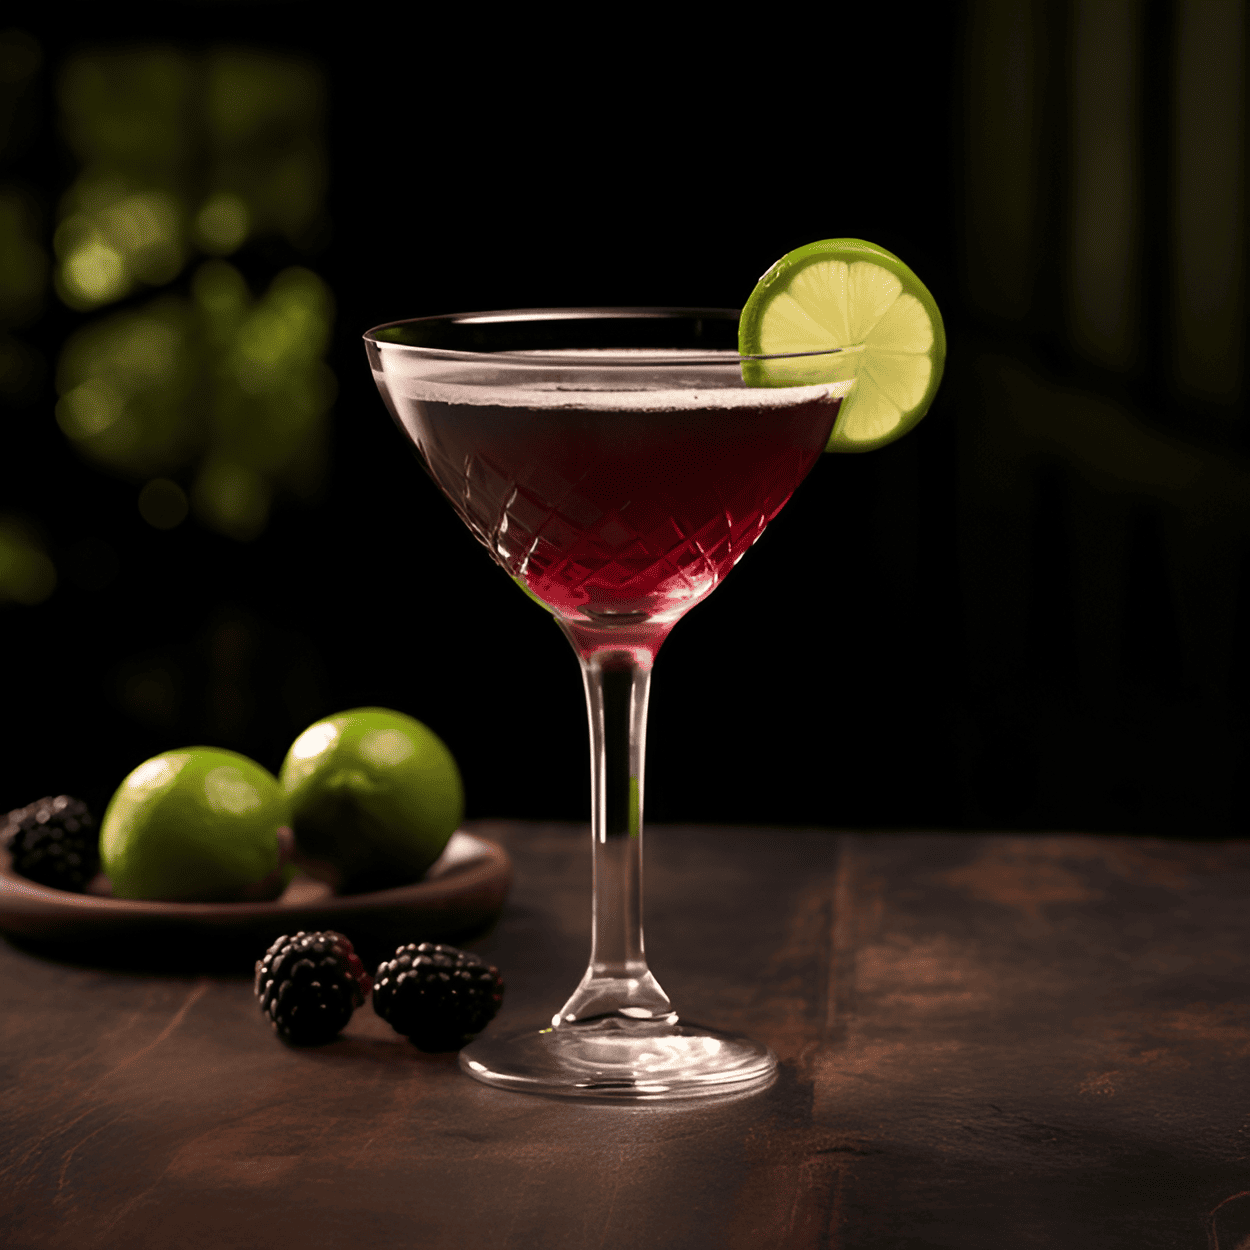 Blackout Cocktail Recipe - The Blackout Cocktail is a robust and complex drink. It has a strong, rich taste with a hint of sweetness from the blackcurrant liqueur. The dark rum adds a deep, warm flavor, while the lime juice gives it a slight tanginess. It's a well-balanced cocktail that leaves a lasting impression.